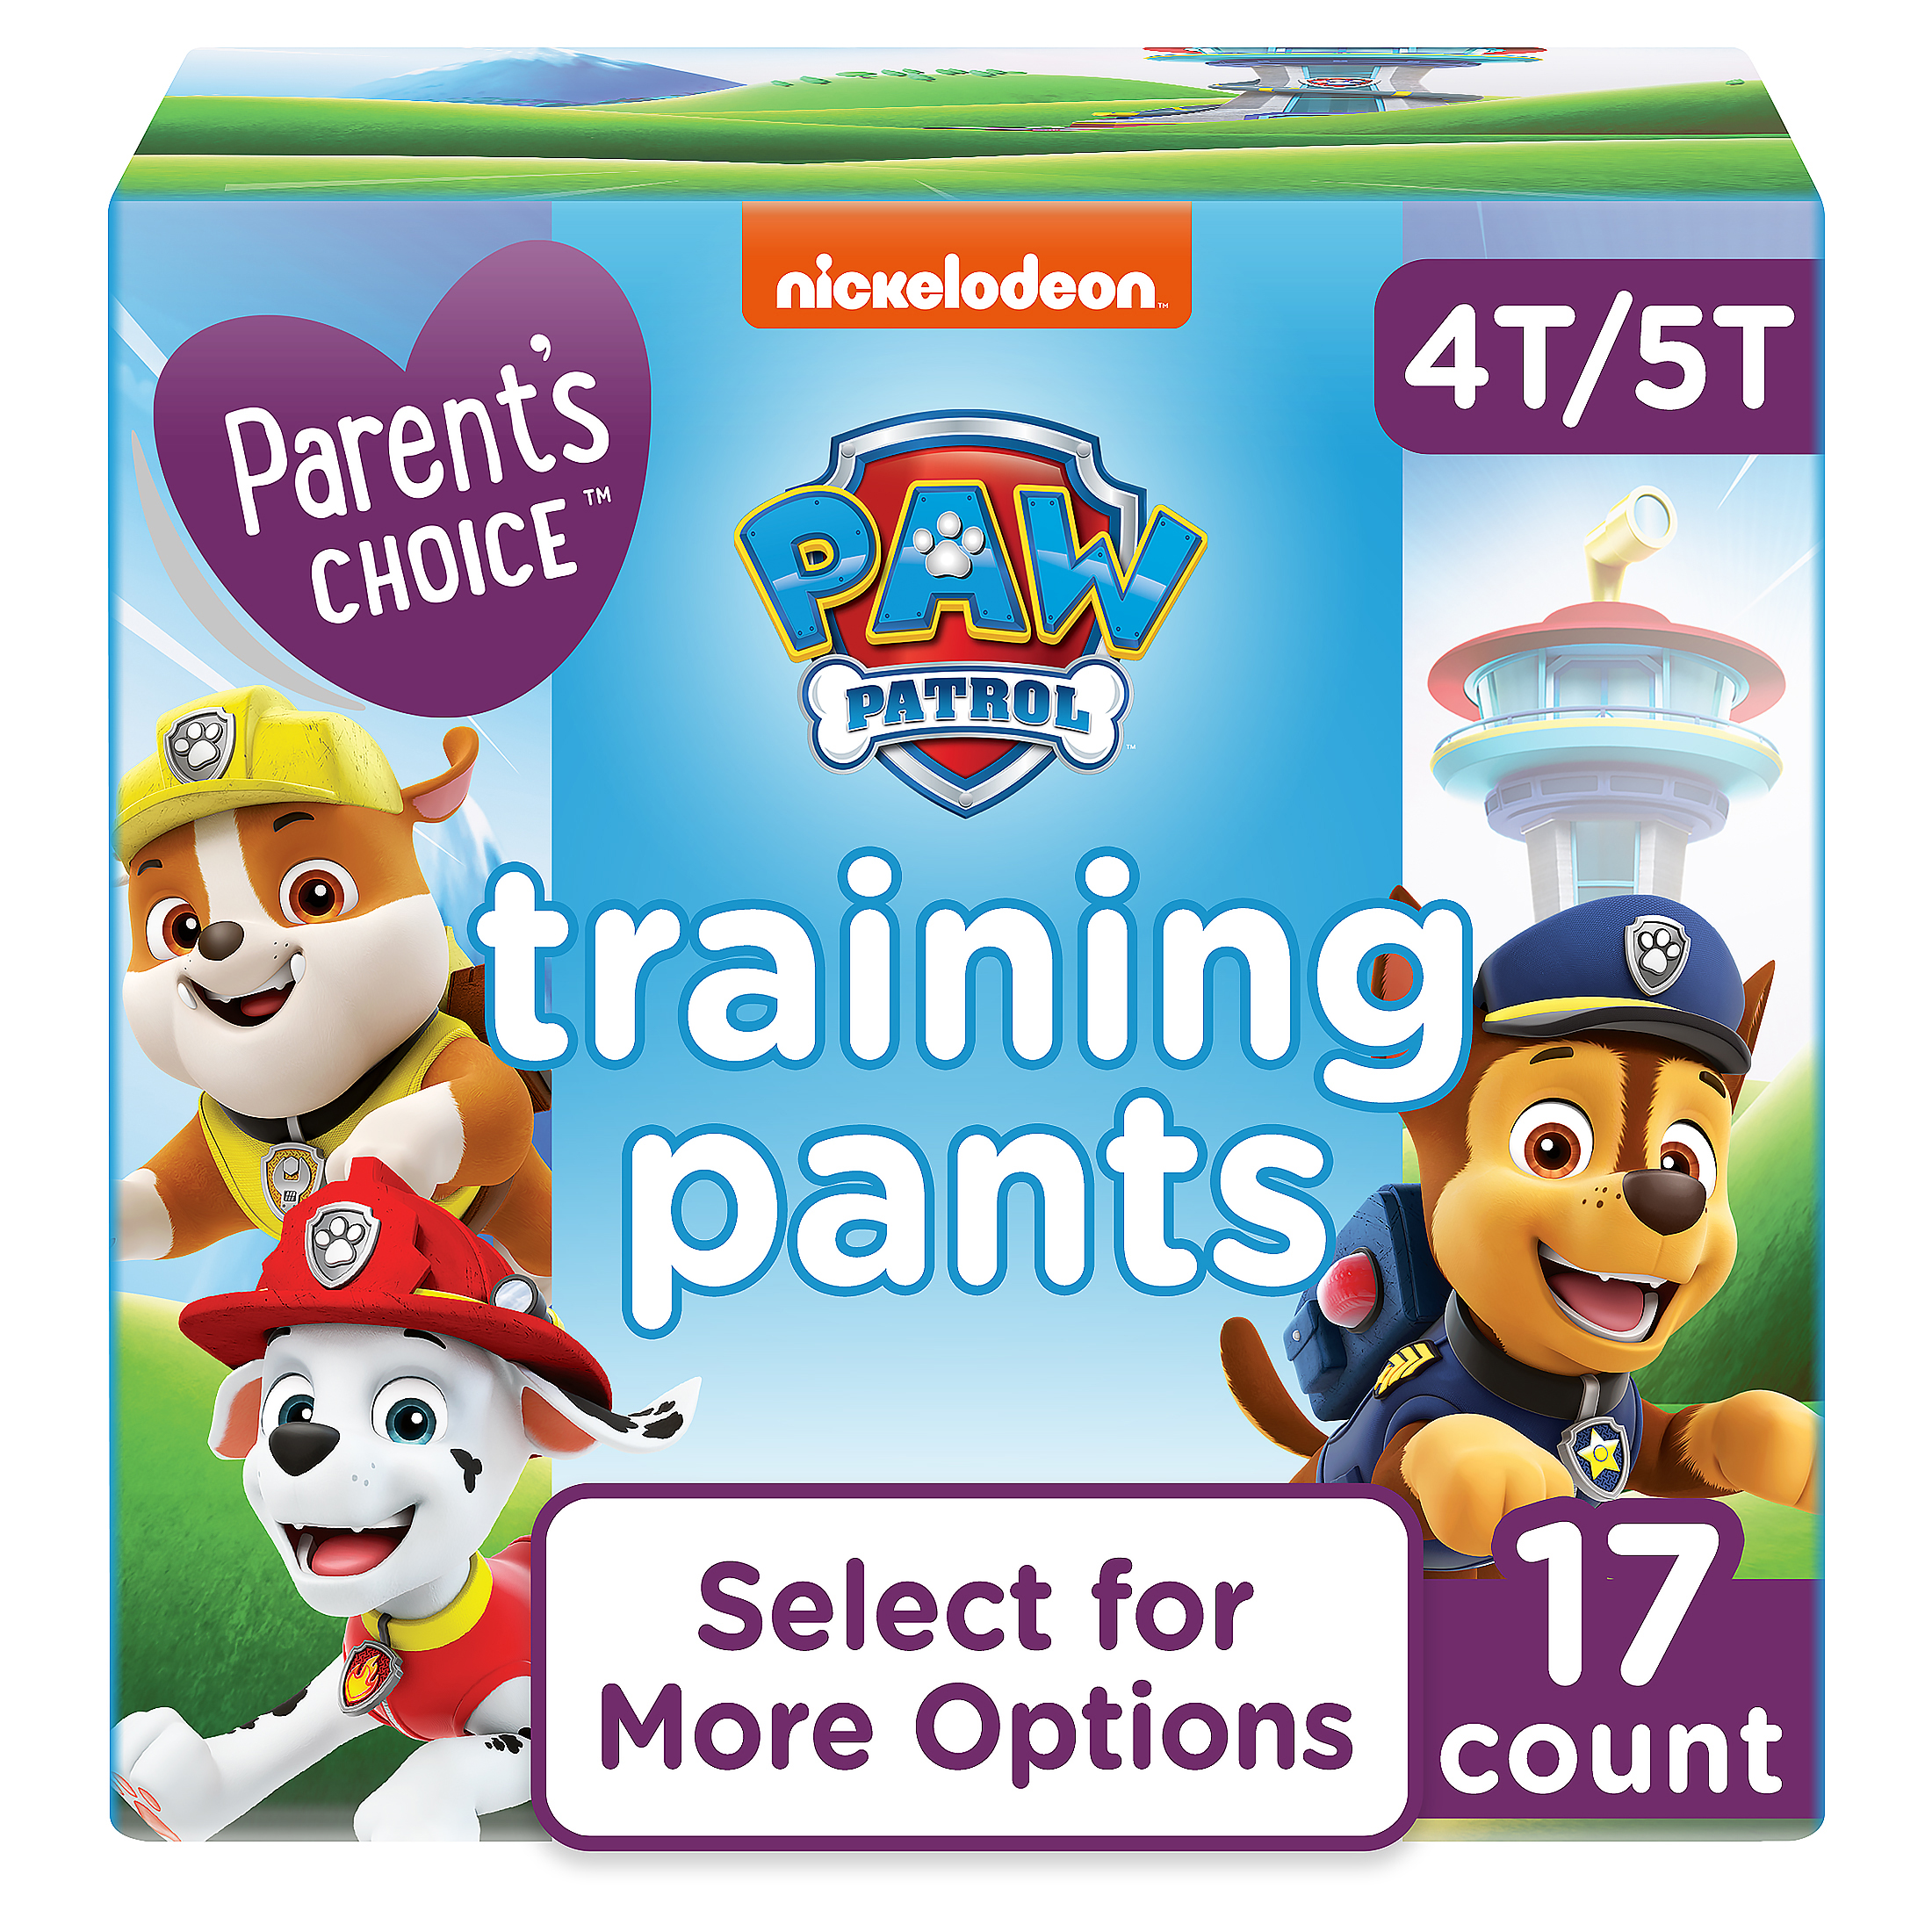 Parent's Choice Paw Patrol Training Pants for Boys, 4T/5T, 17 Count (Select for More Options) - image 1 of 10